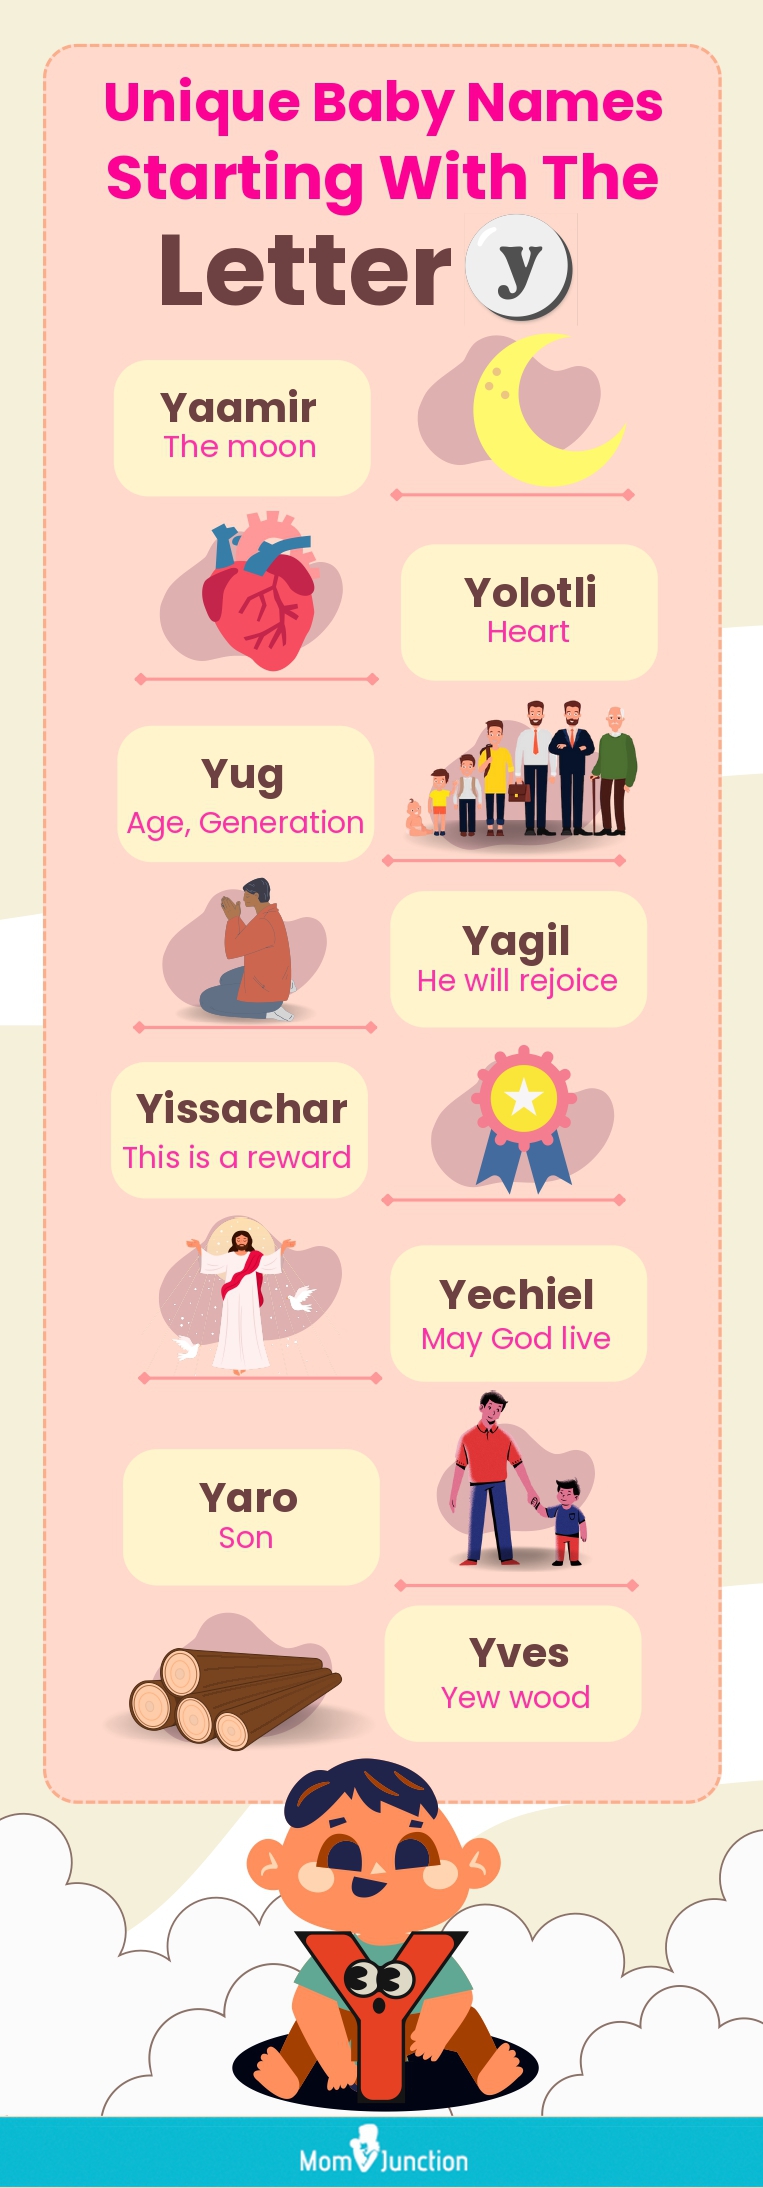 unique baby names starting with the letter y (infographic)